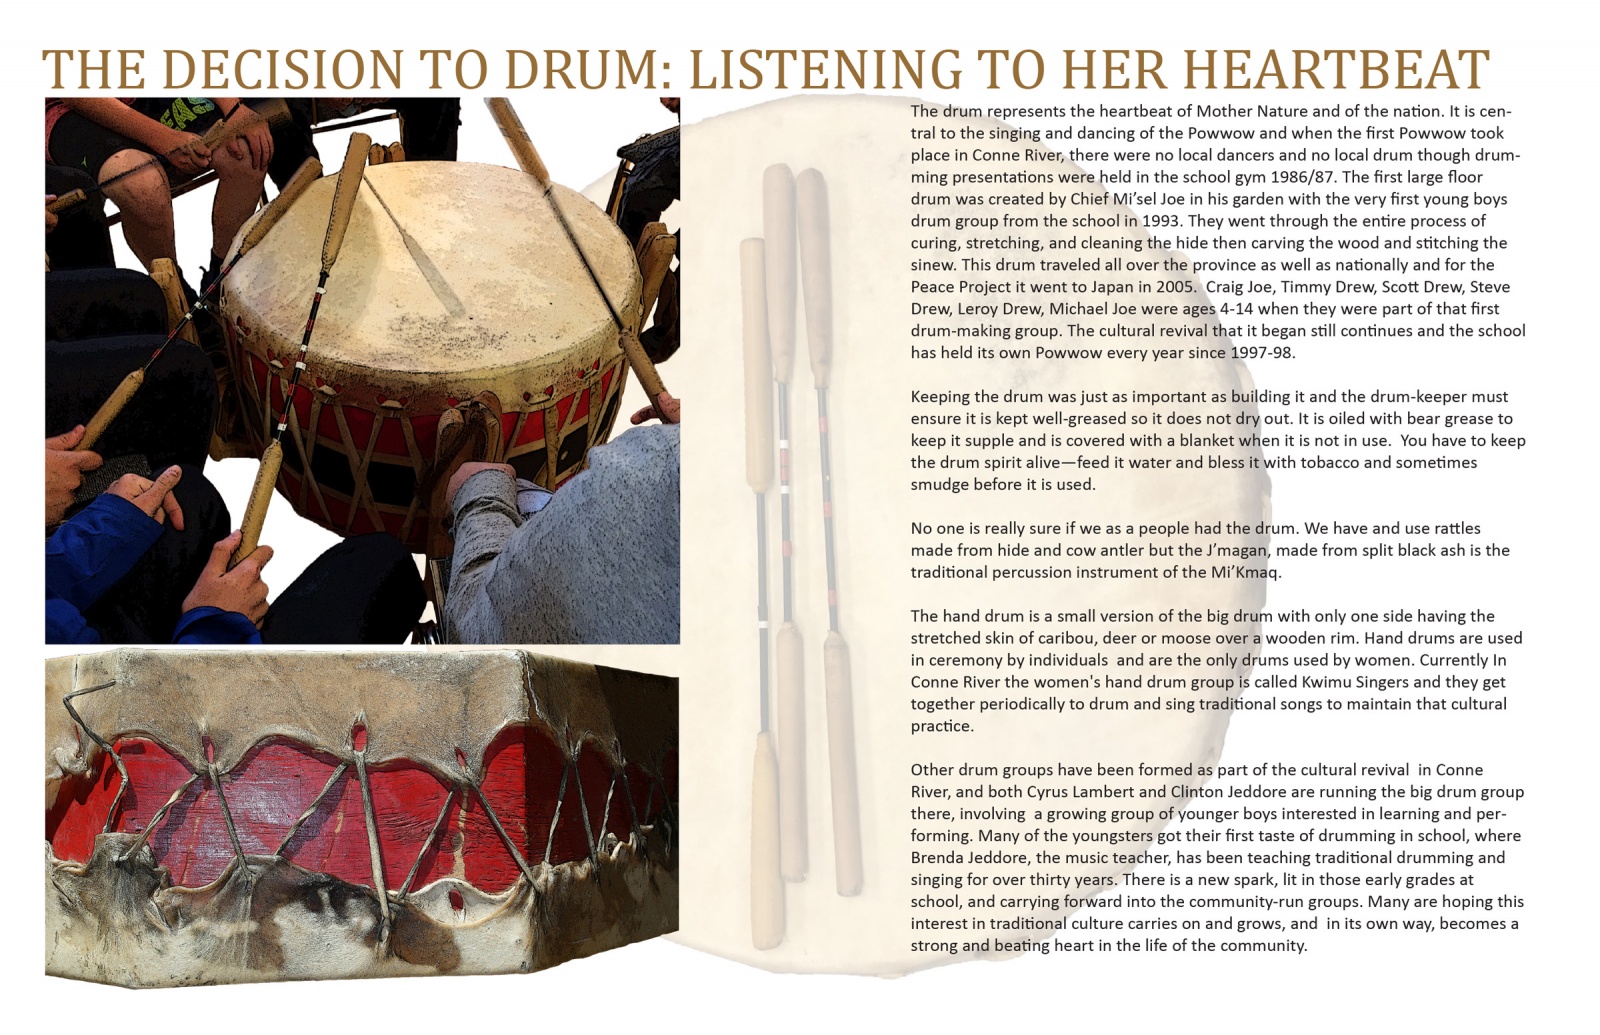 The Decision to Drum: Listening to Her Heartbeat